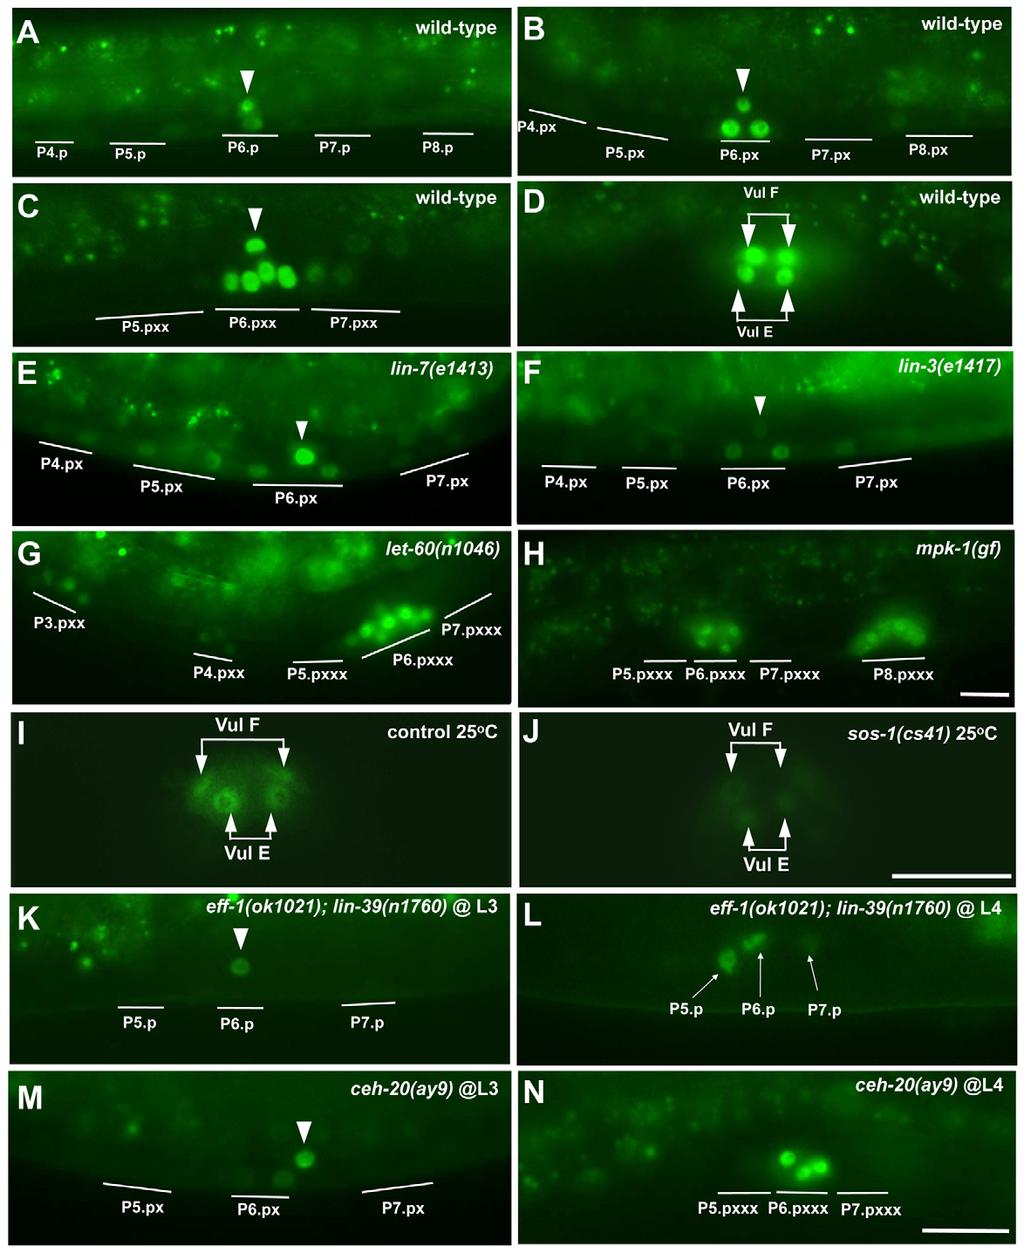 Development 138 (21) Fig. 6. VAB-23::GFP expression pattern and its regulation by EGFR/RAS/MAPK and LIN-39. (A-D) VAB-23::GFP expression in wild-type larvae from the Pn.p to the Pn.pxxx stages.